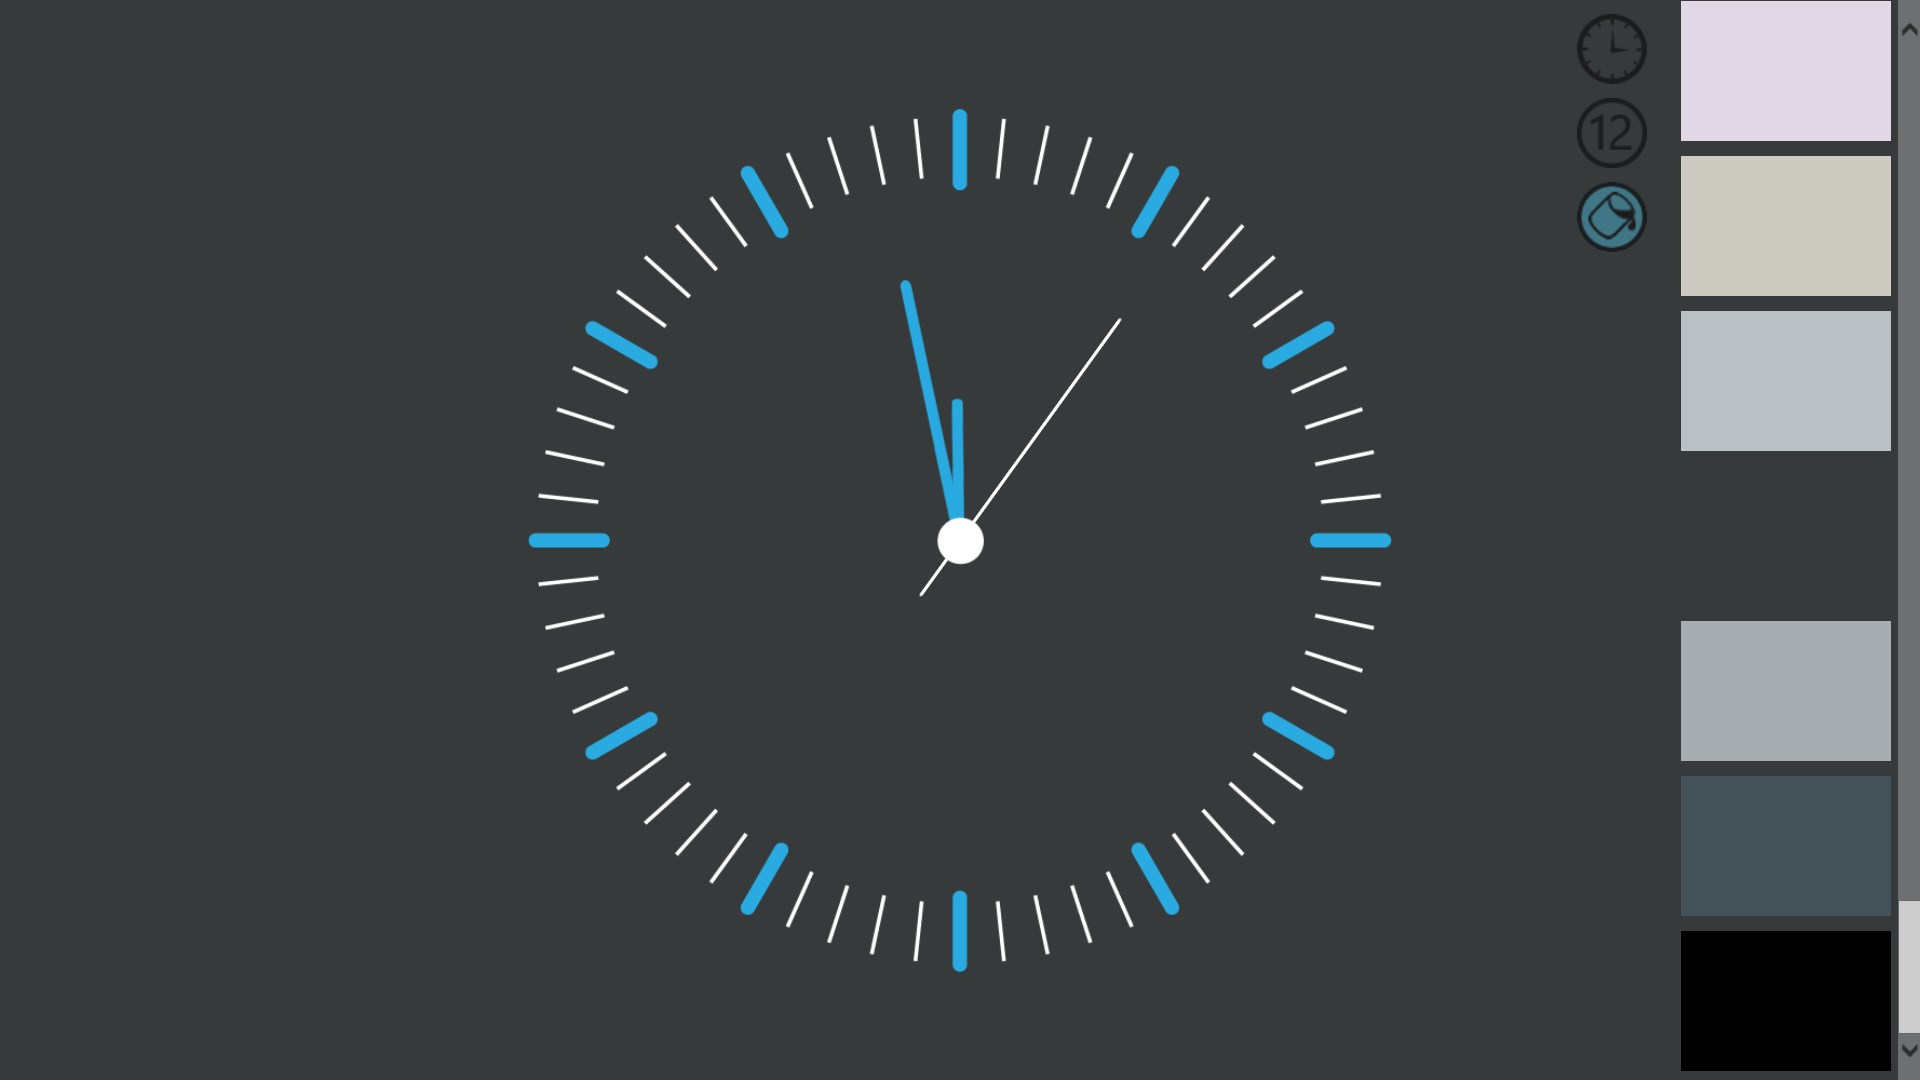 animated clock wallpaper for mobile